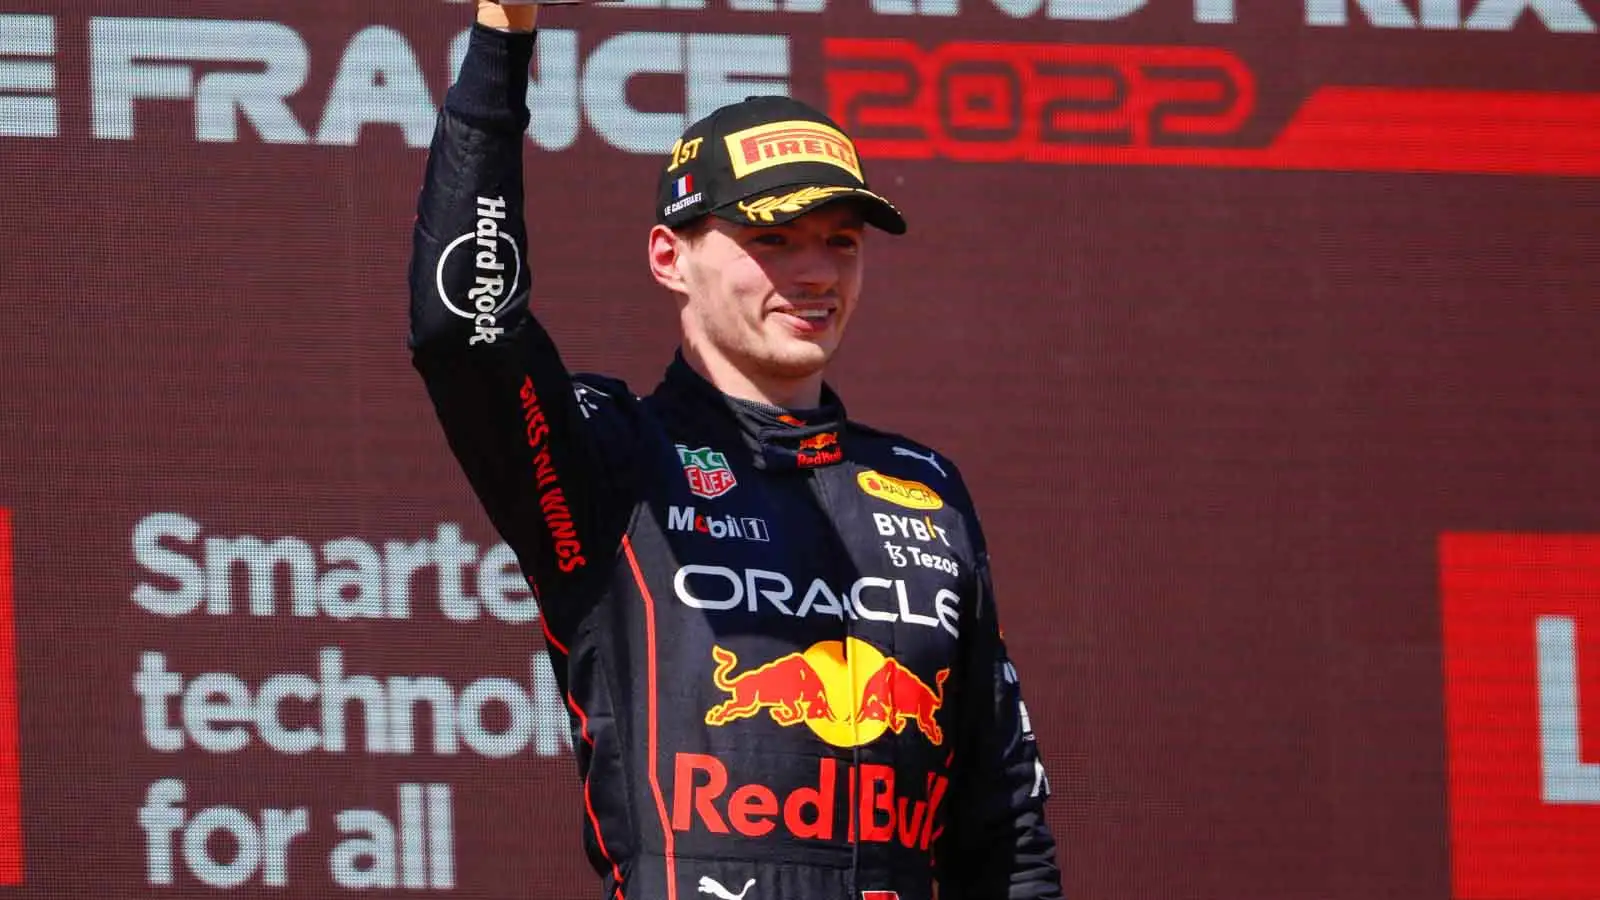 Max Verstappen with the P1 trophy aloft. Paul Ricard July 2022.